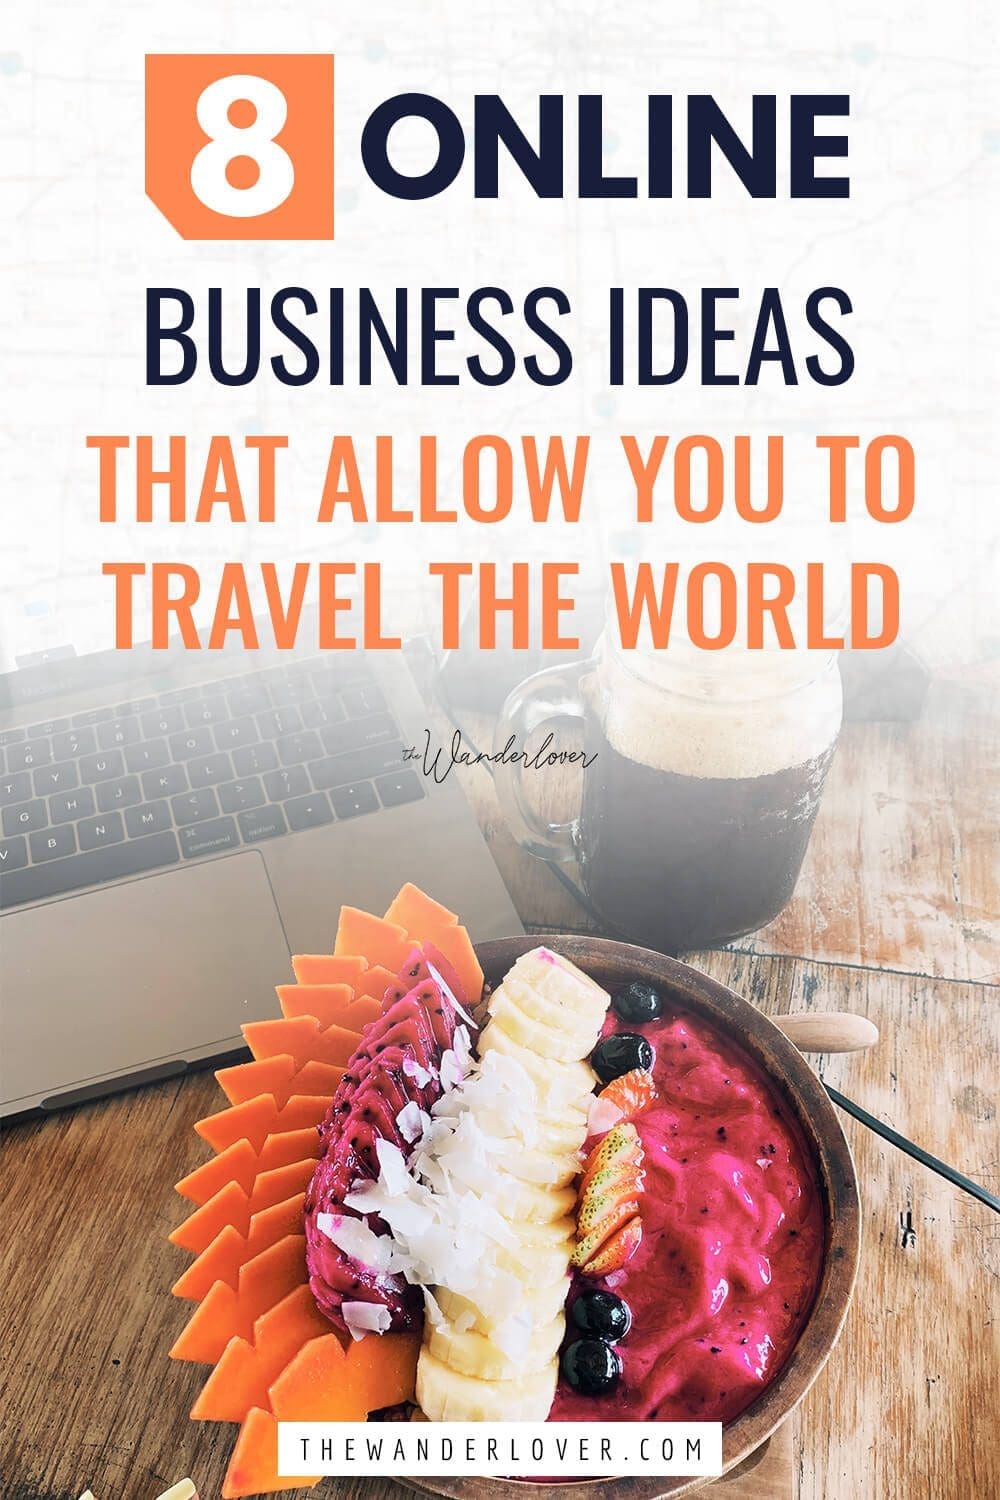 8 Proven Online Business Ideas that Allow You to Travel The World